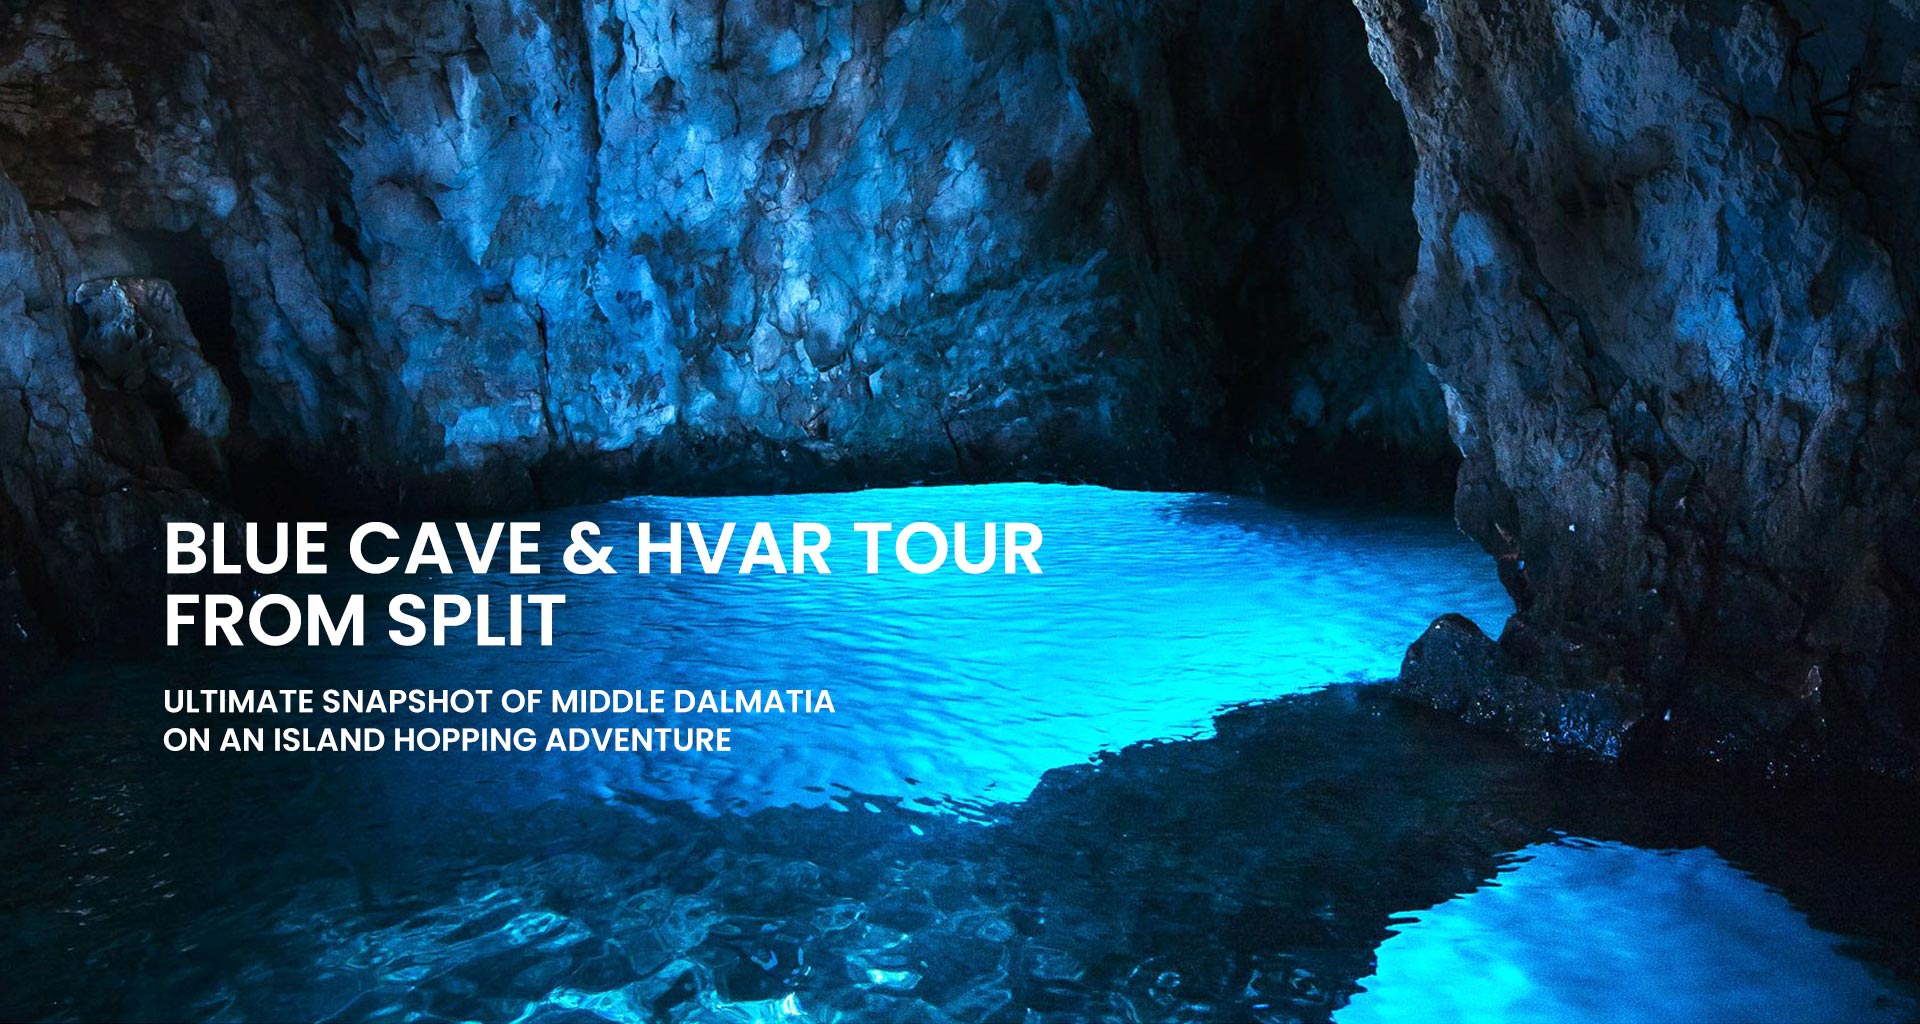 Private tour to Blue Cave and Hvar